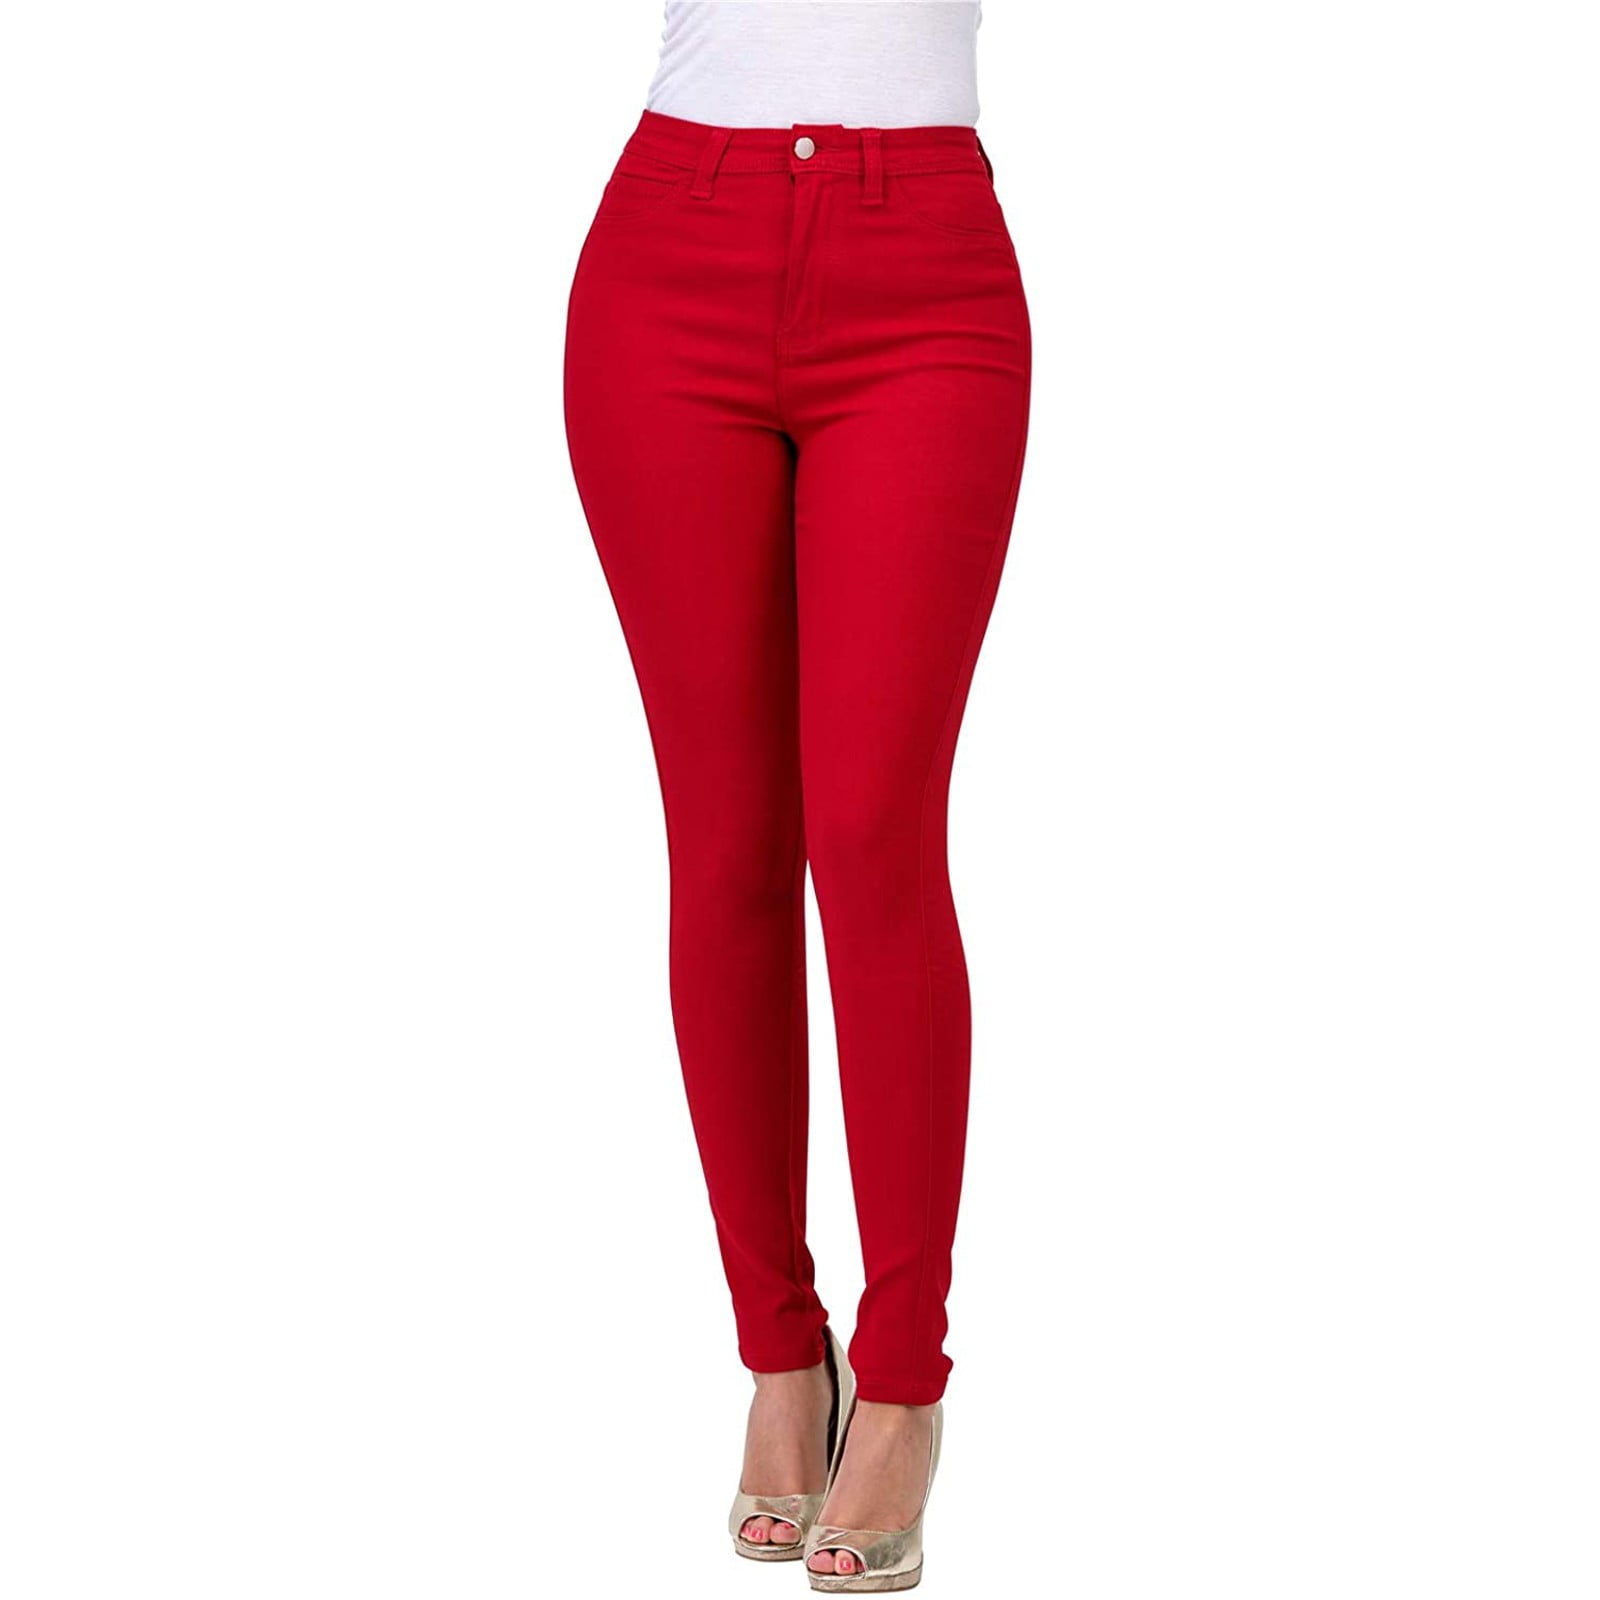 WANYNG pants for women Waisted Rise High Pant Stretc For Skinny